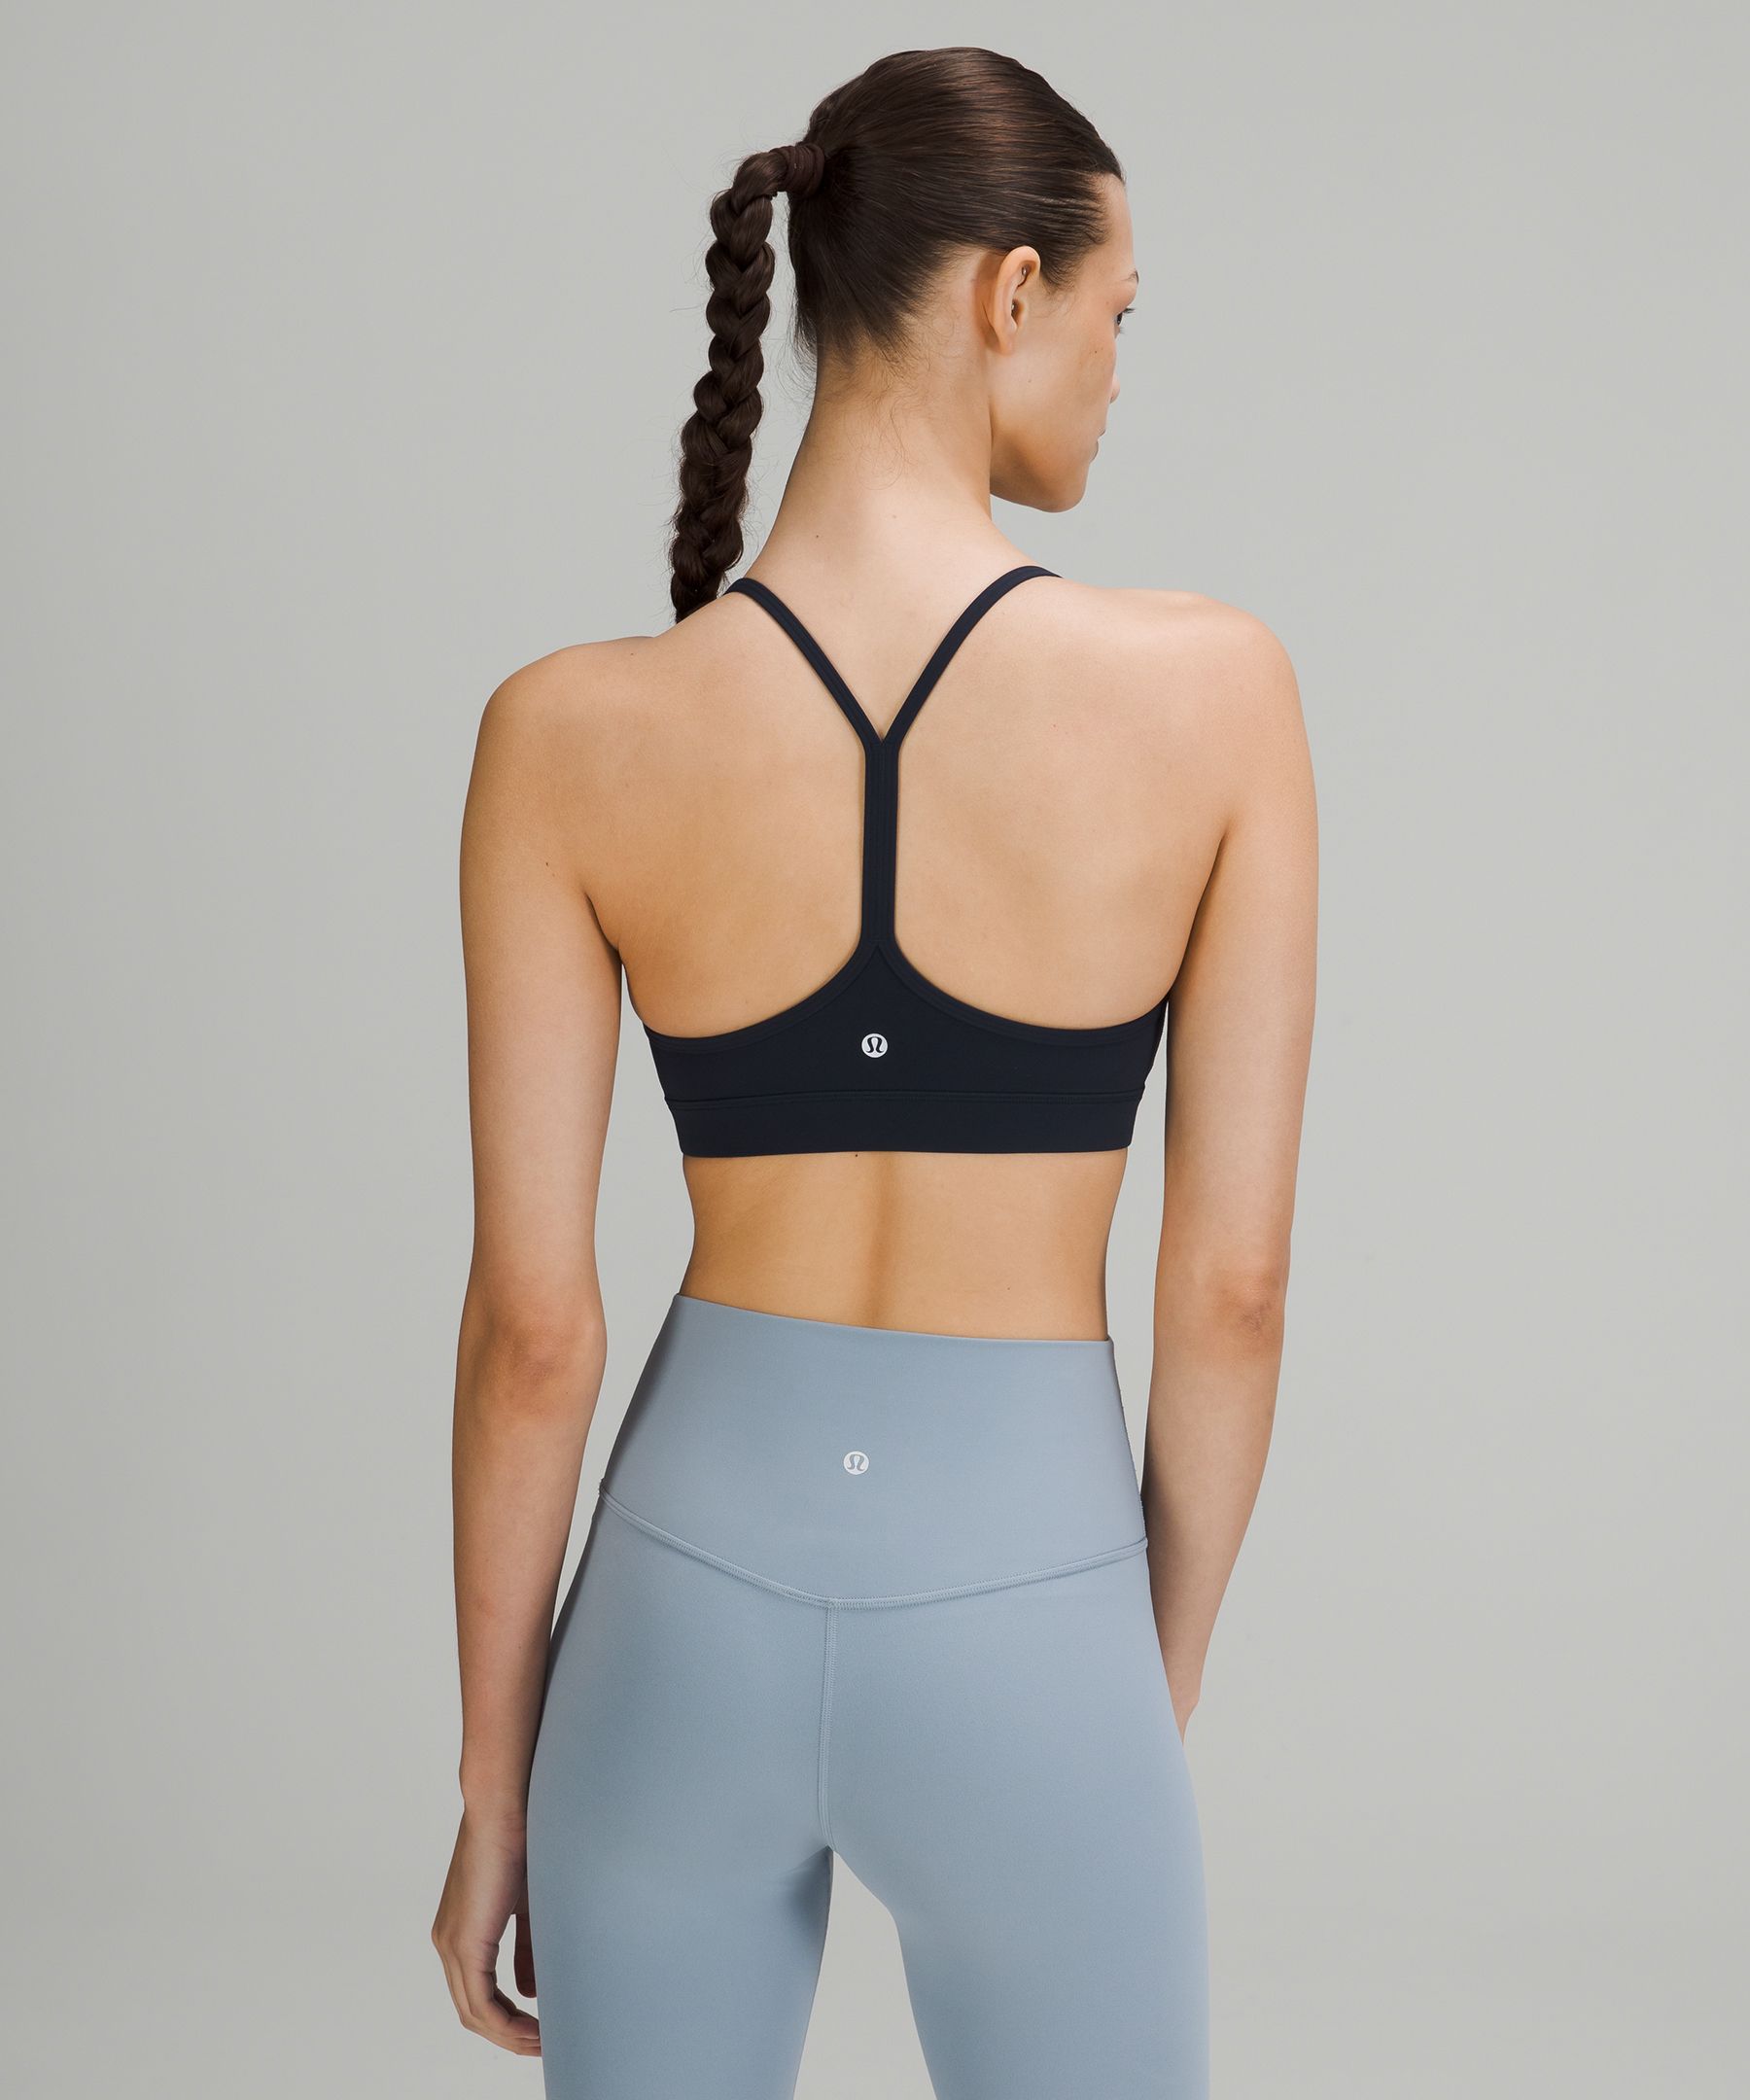 Lululemon air support bra NWT Size undefined - $50 - From Hailey